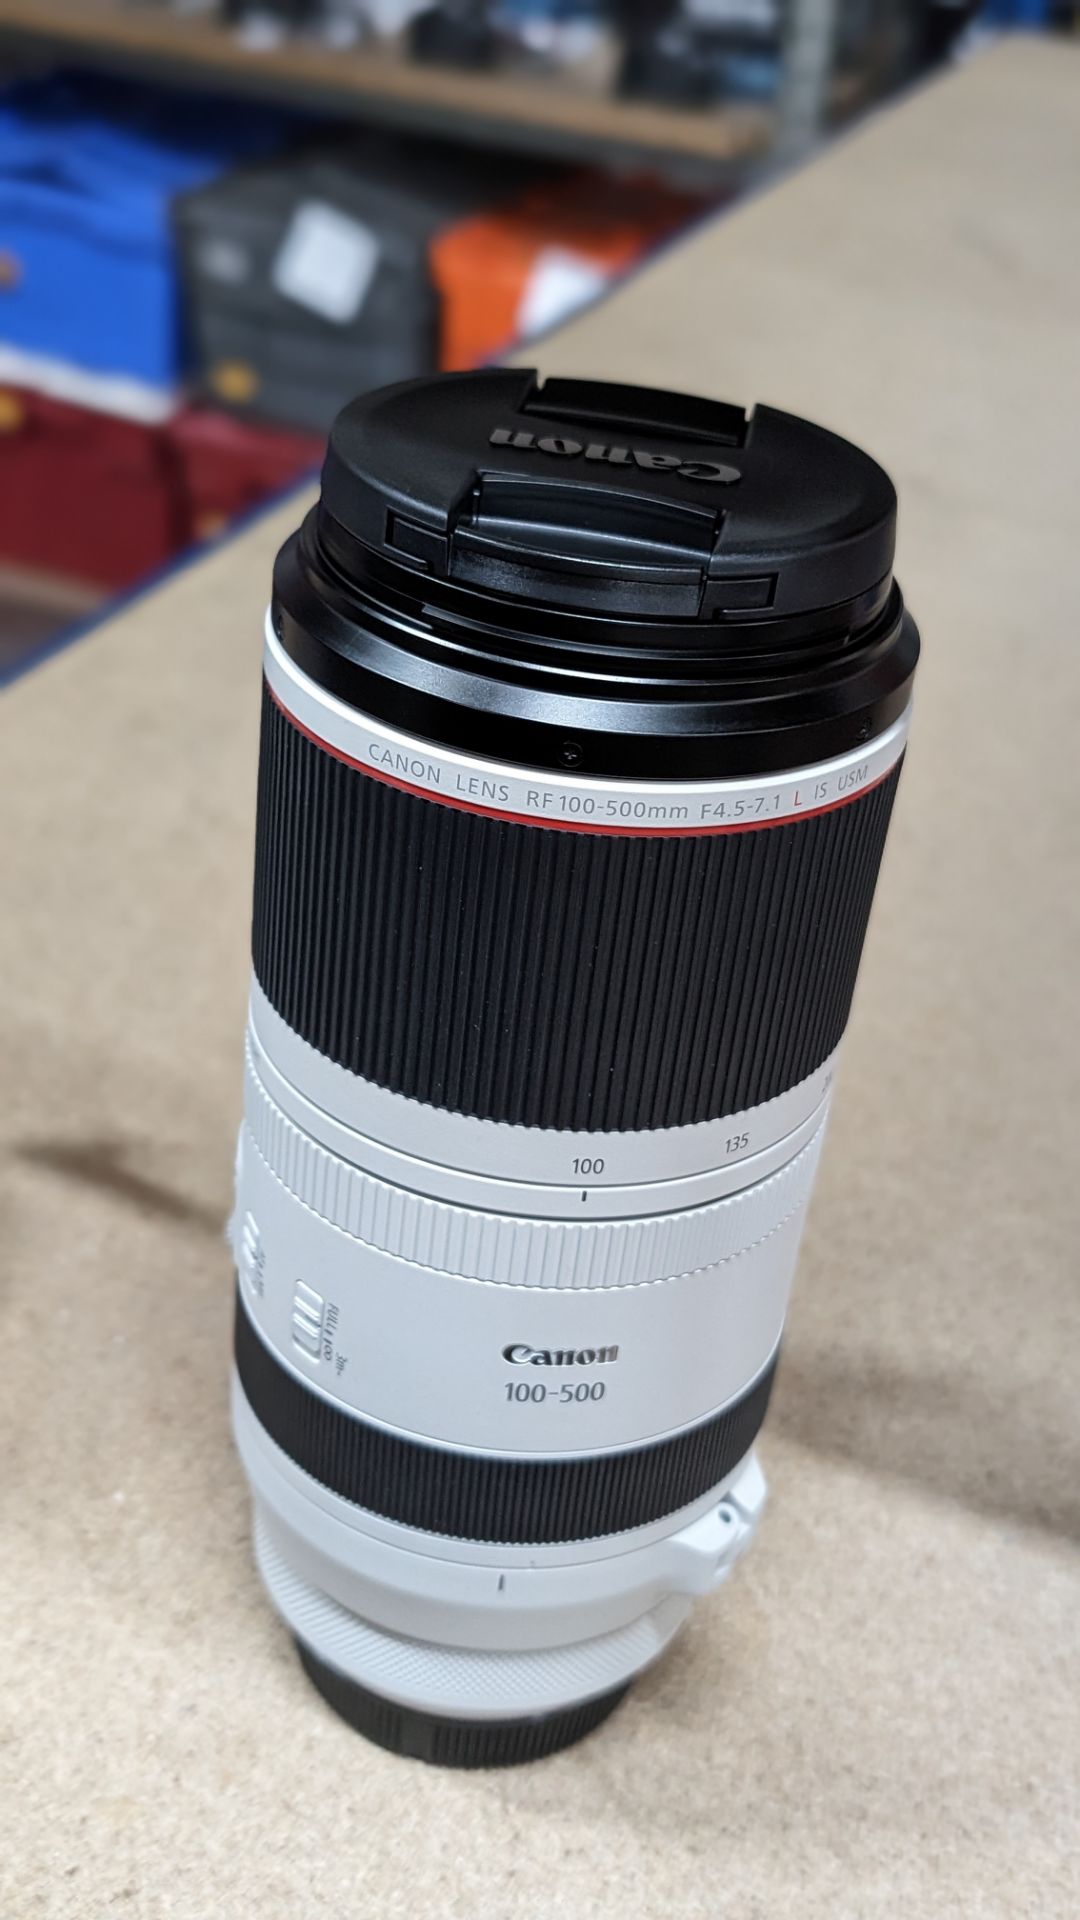 Canon RF 100-500mm lens, f4.5/7.1 L IS USM, including soft carry case and strap - Image 25 of 28